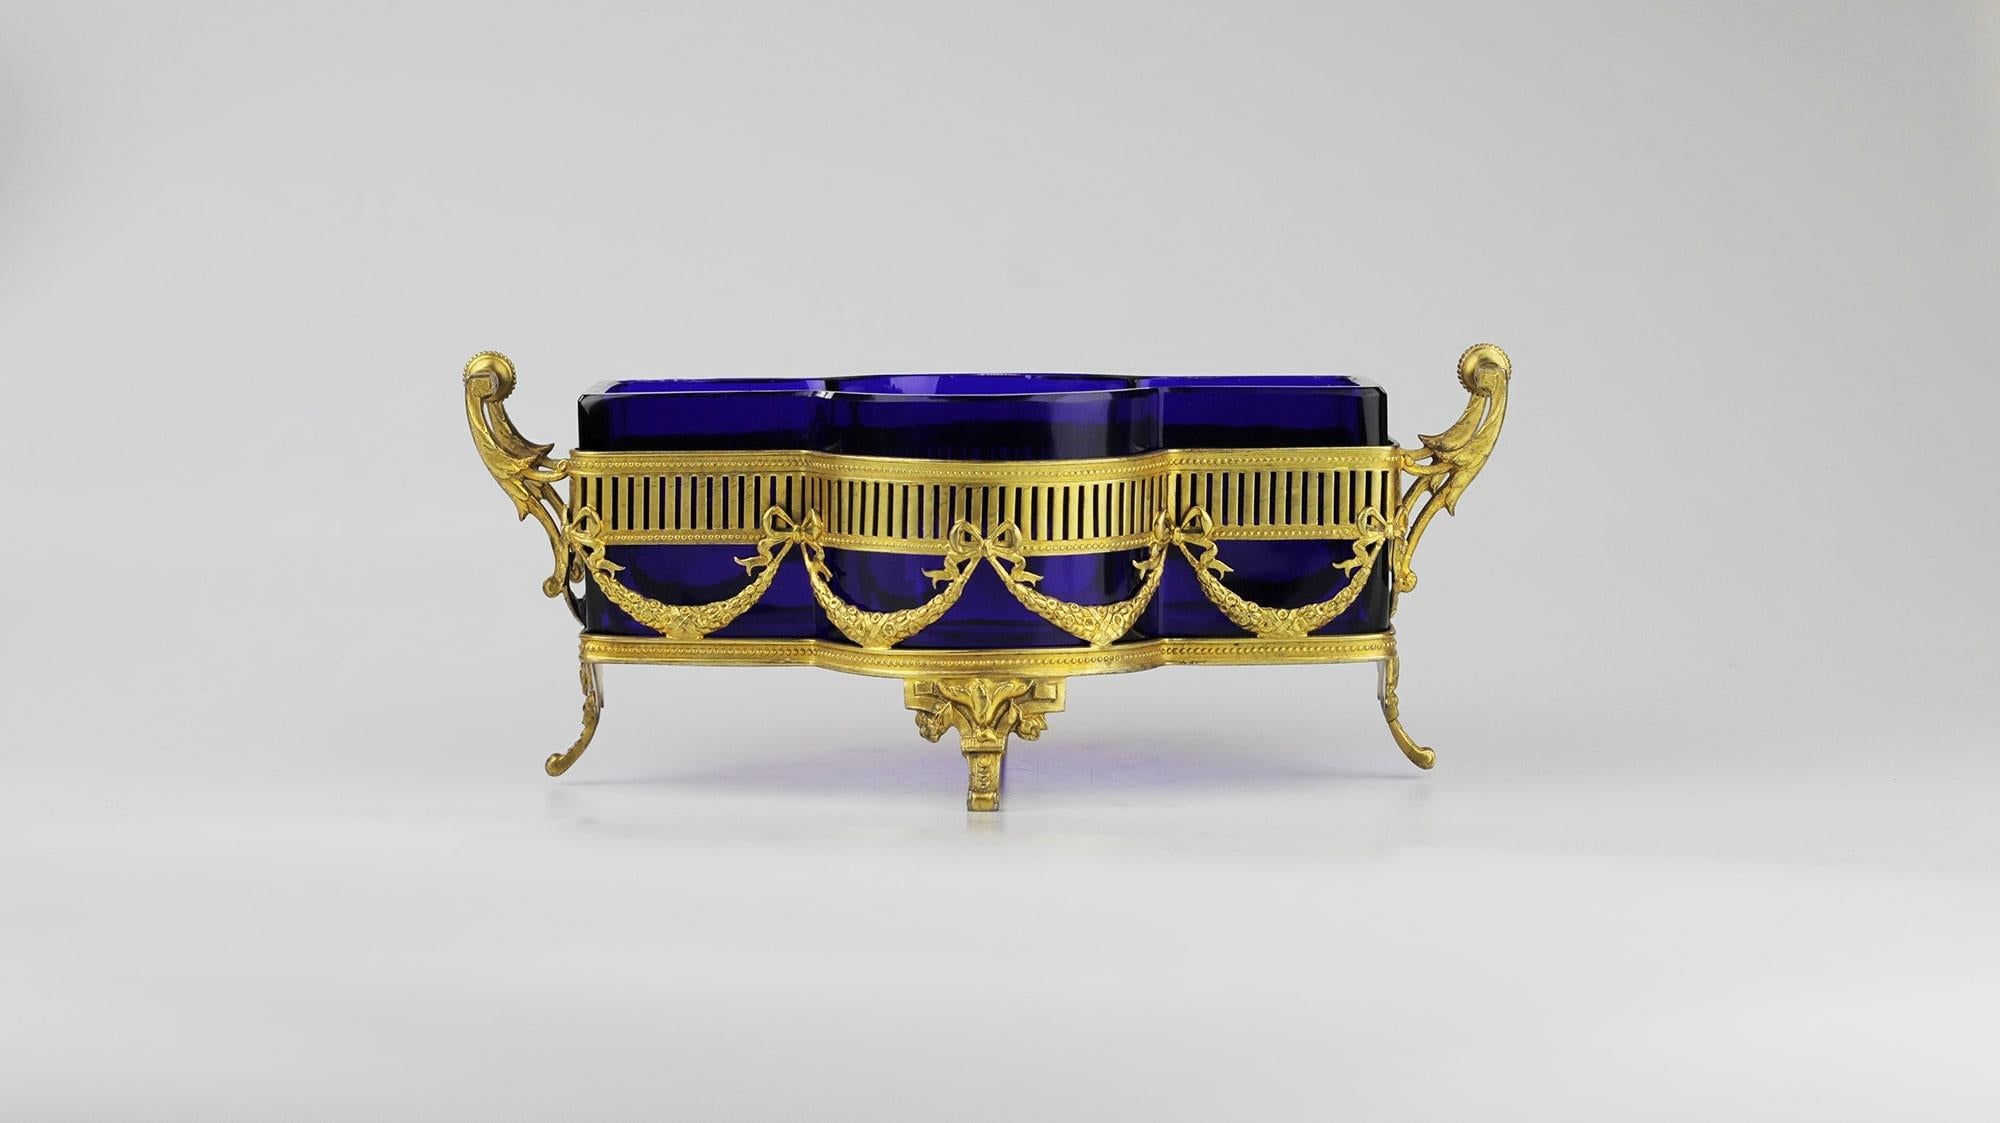 An impressive gilt sterling silver footed basket with original cobalt blue glass liner. The silver frame sits upon four gilt sterling feet and externally features swags with bows and neoclassical style detailing. The inside of the gilt silver basket